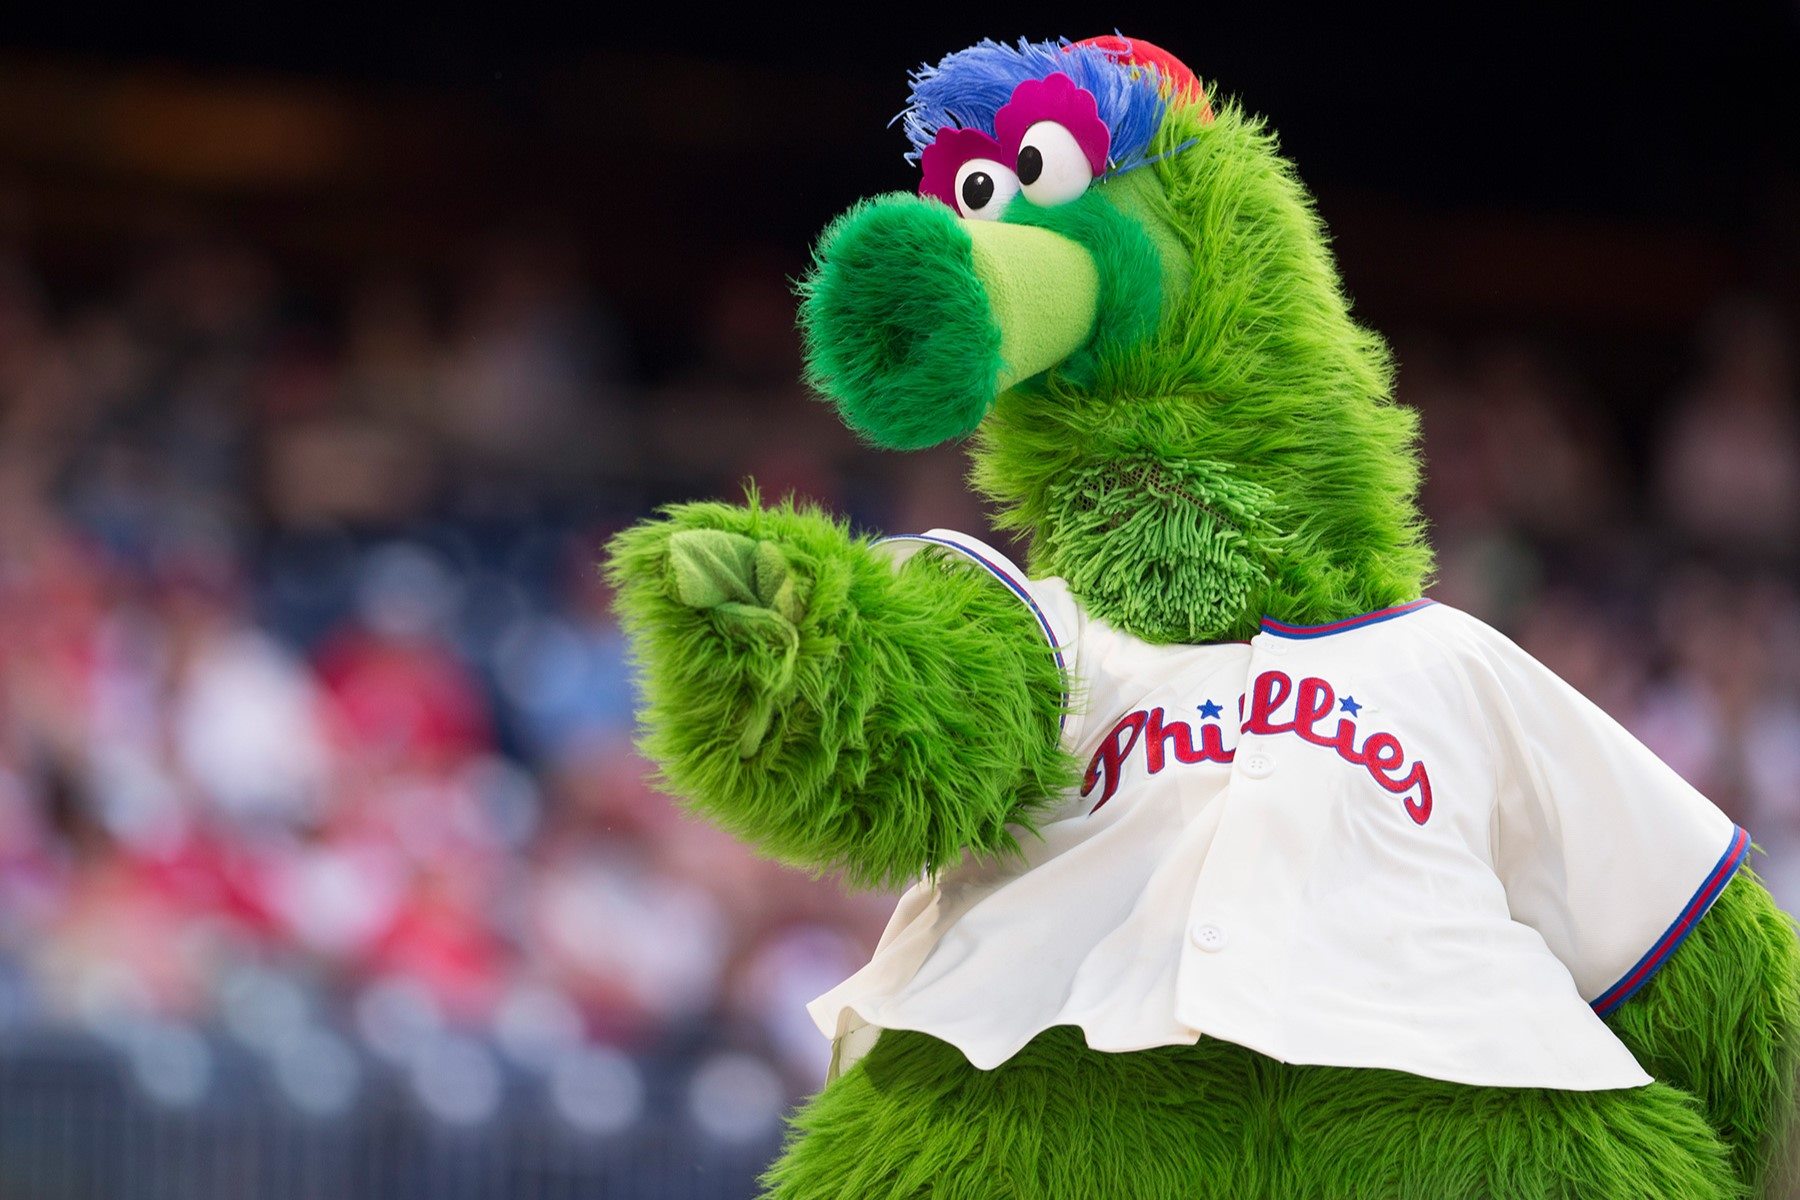 The Surprising Salary Of The Phillie Phanatic Revealed!